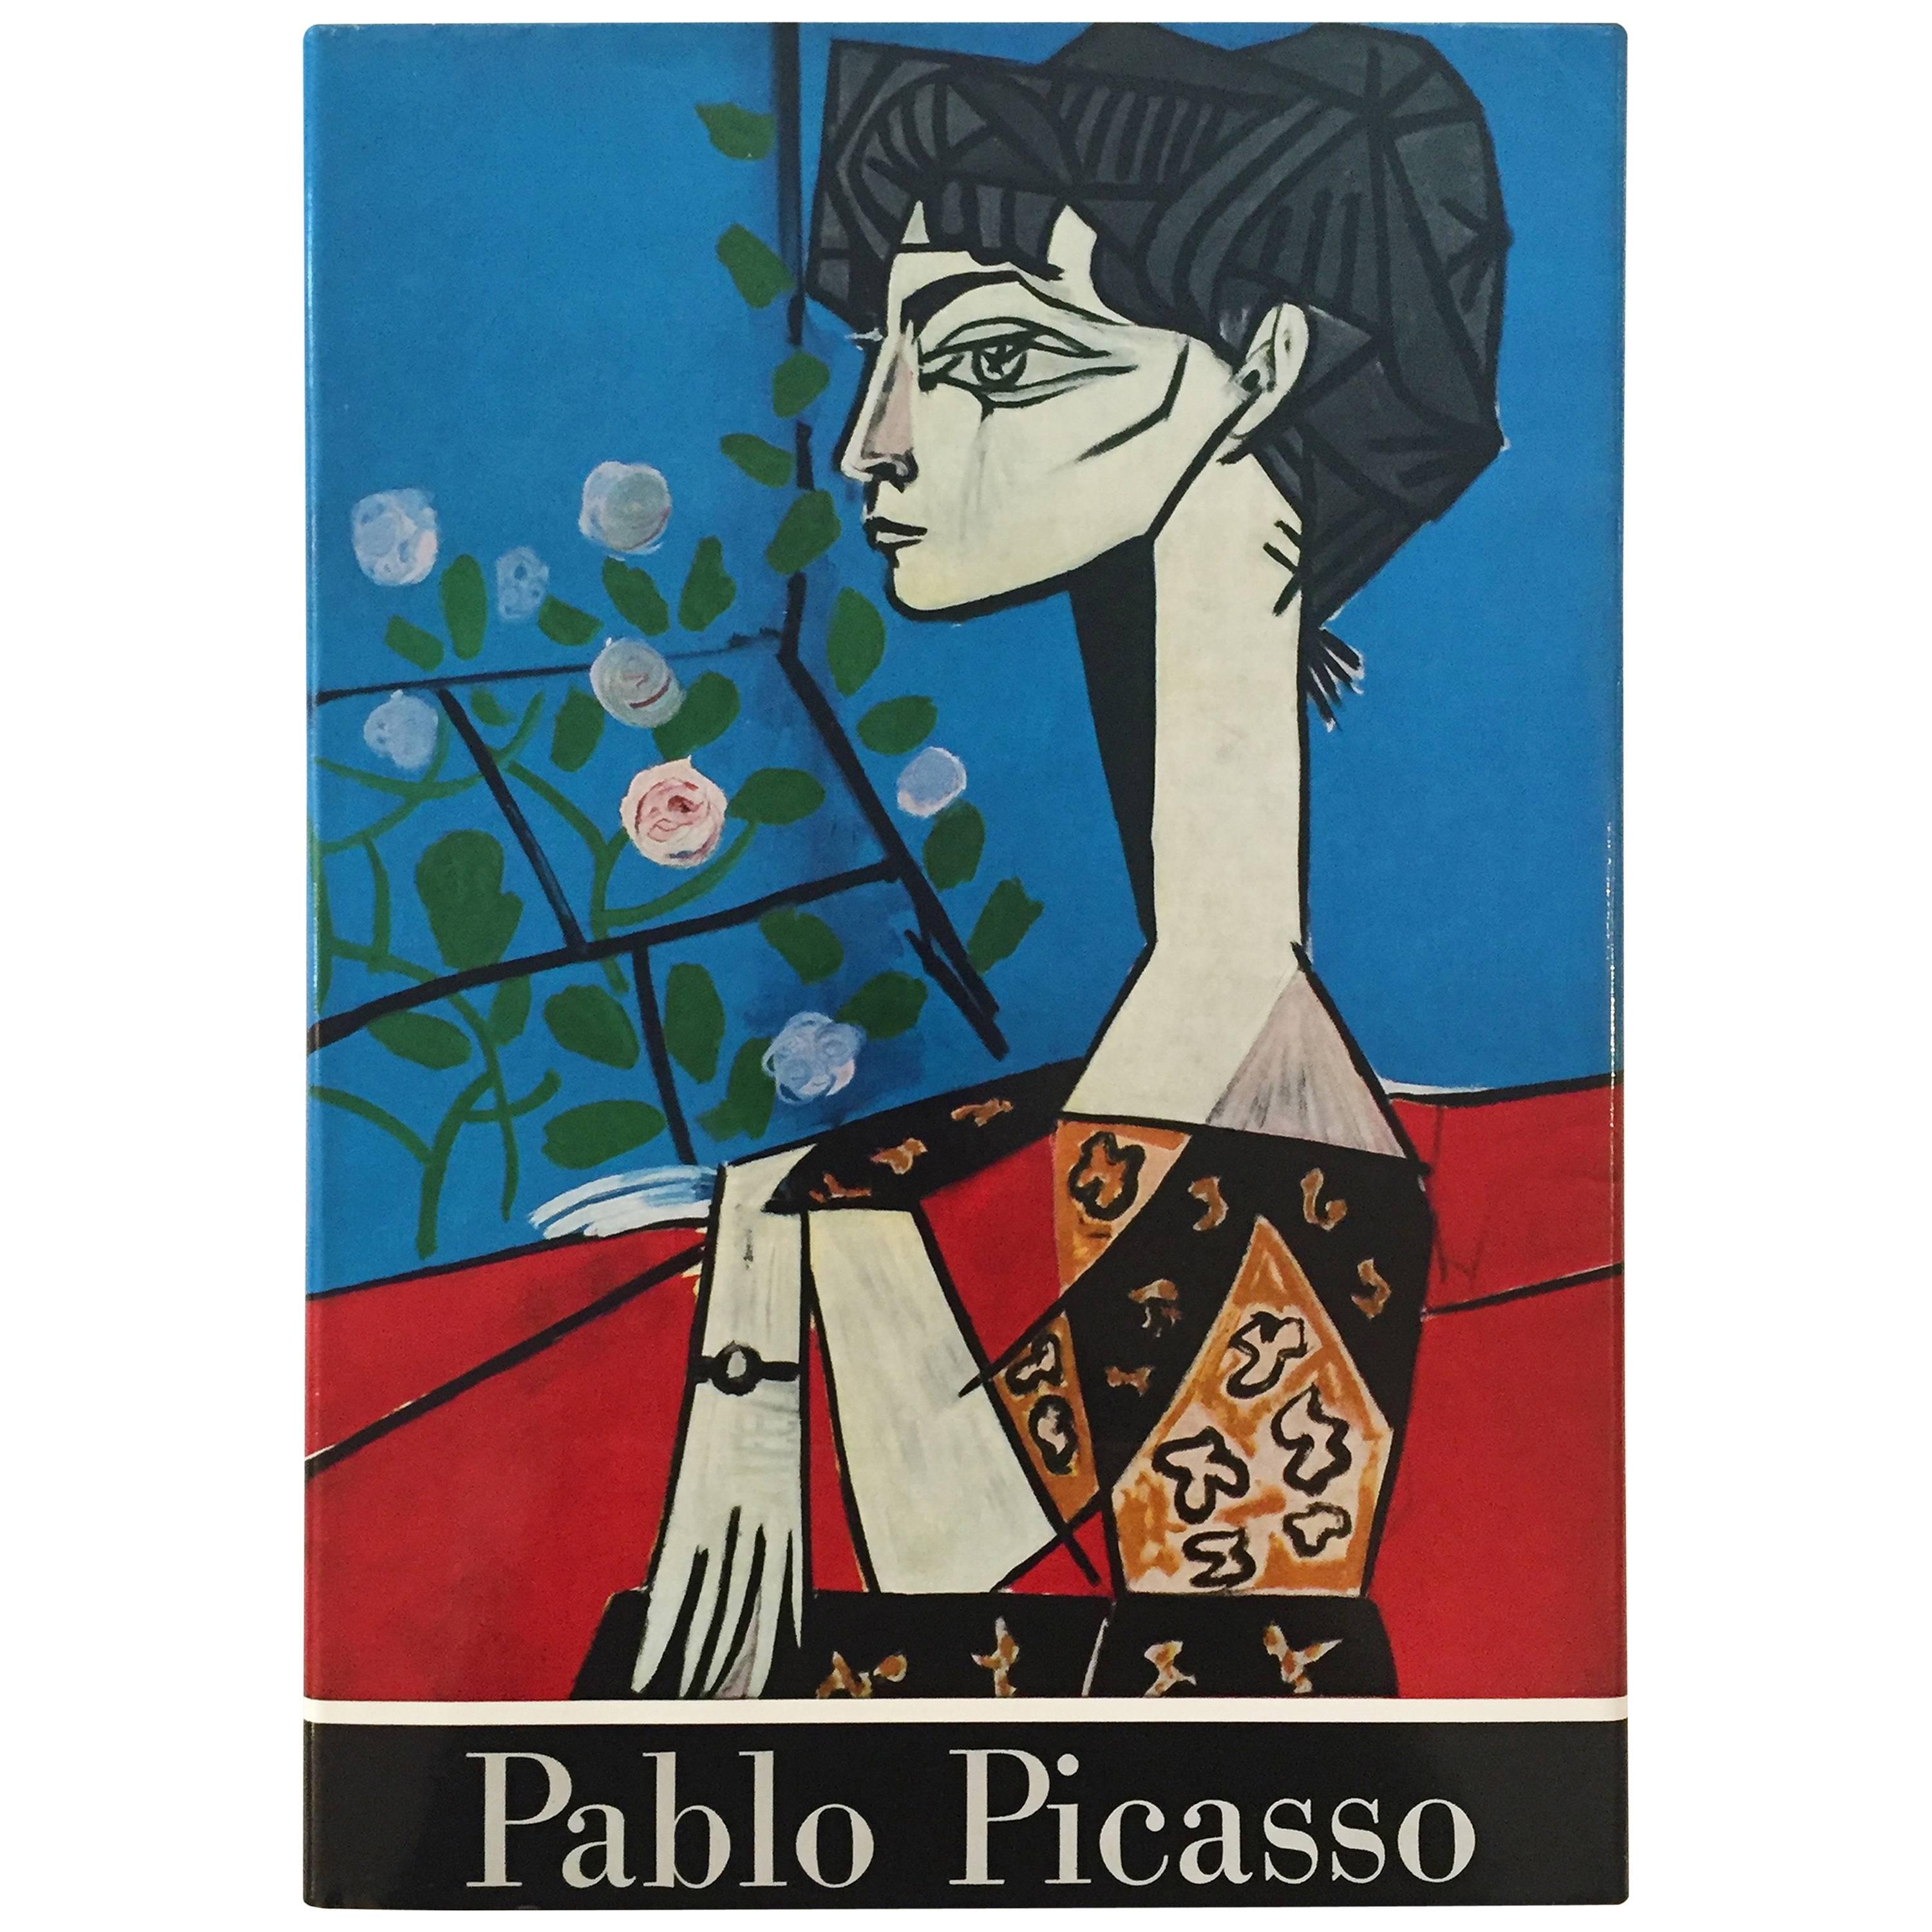 Pablo Picasso - a stunning monograph 1955